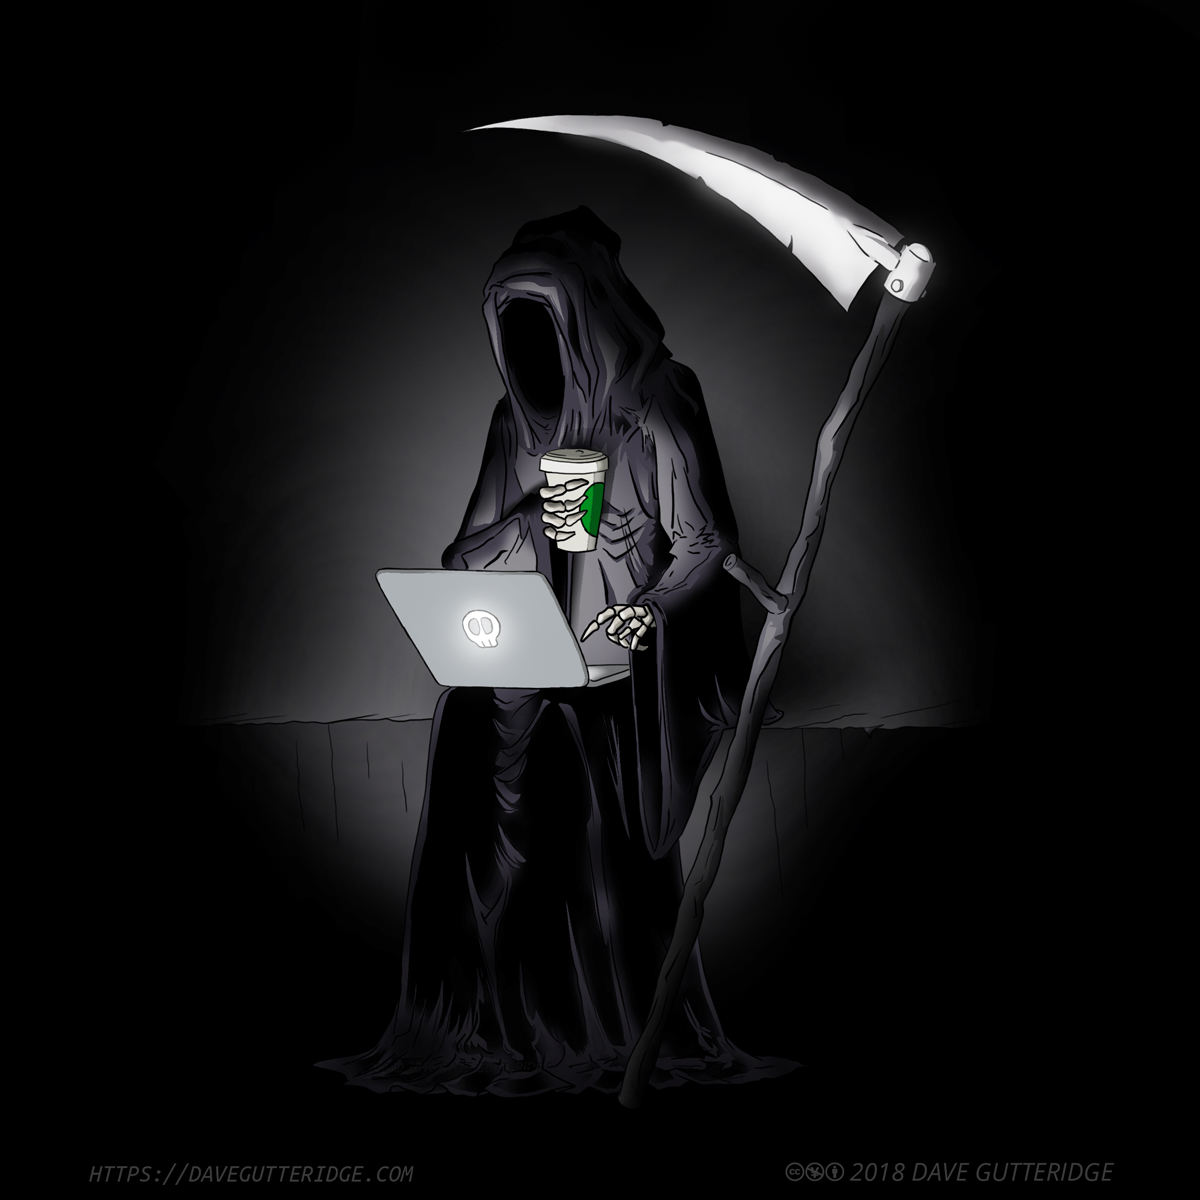 The Grim Reaper having a coffee and looking at his laptop.